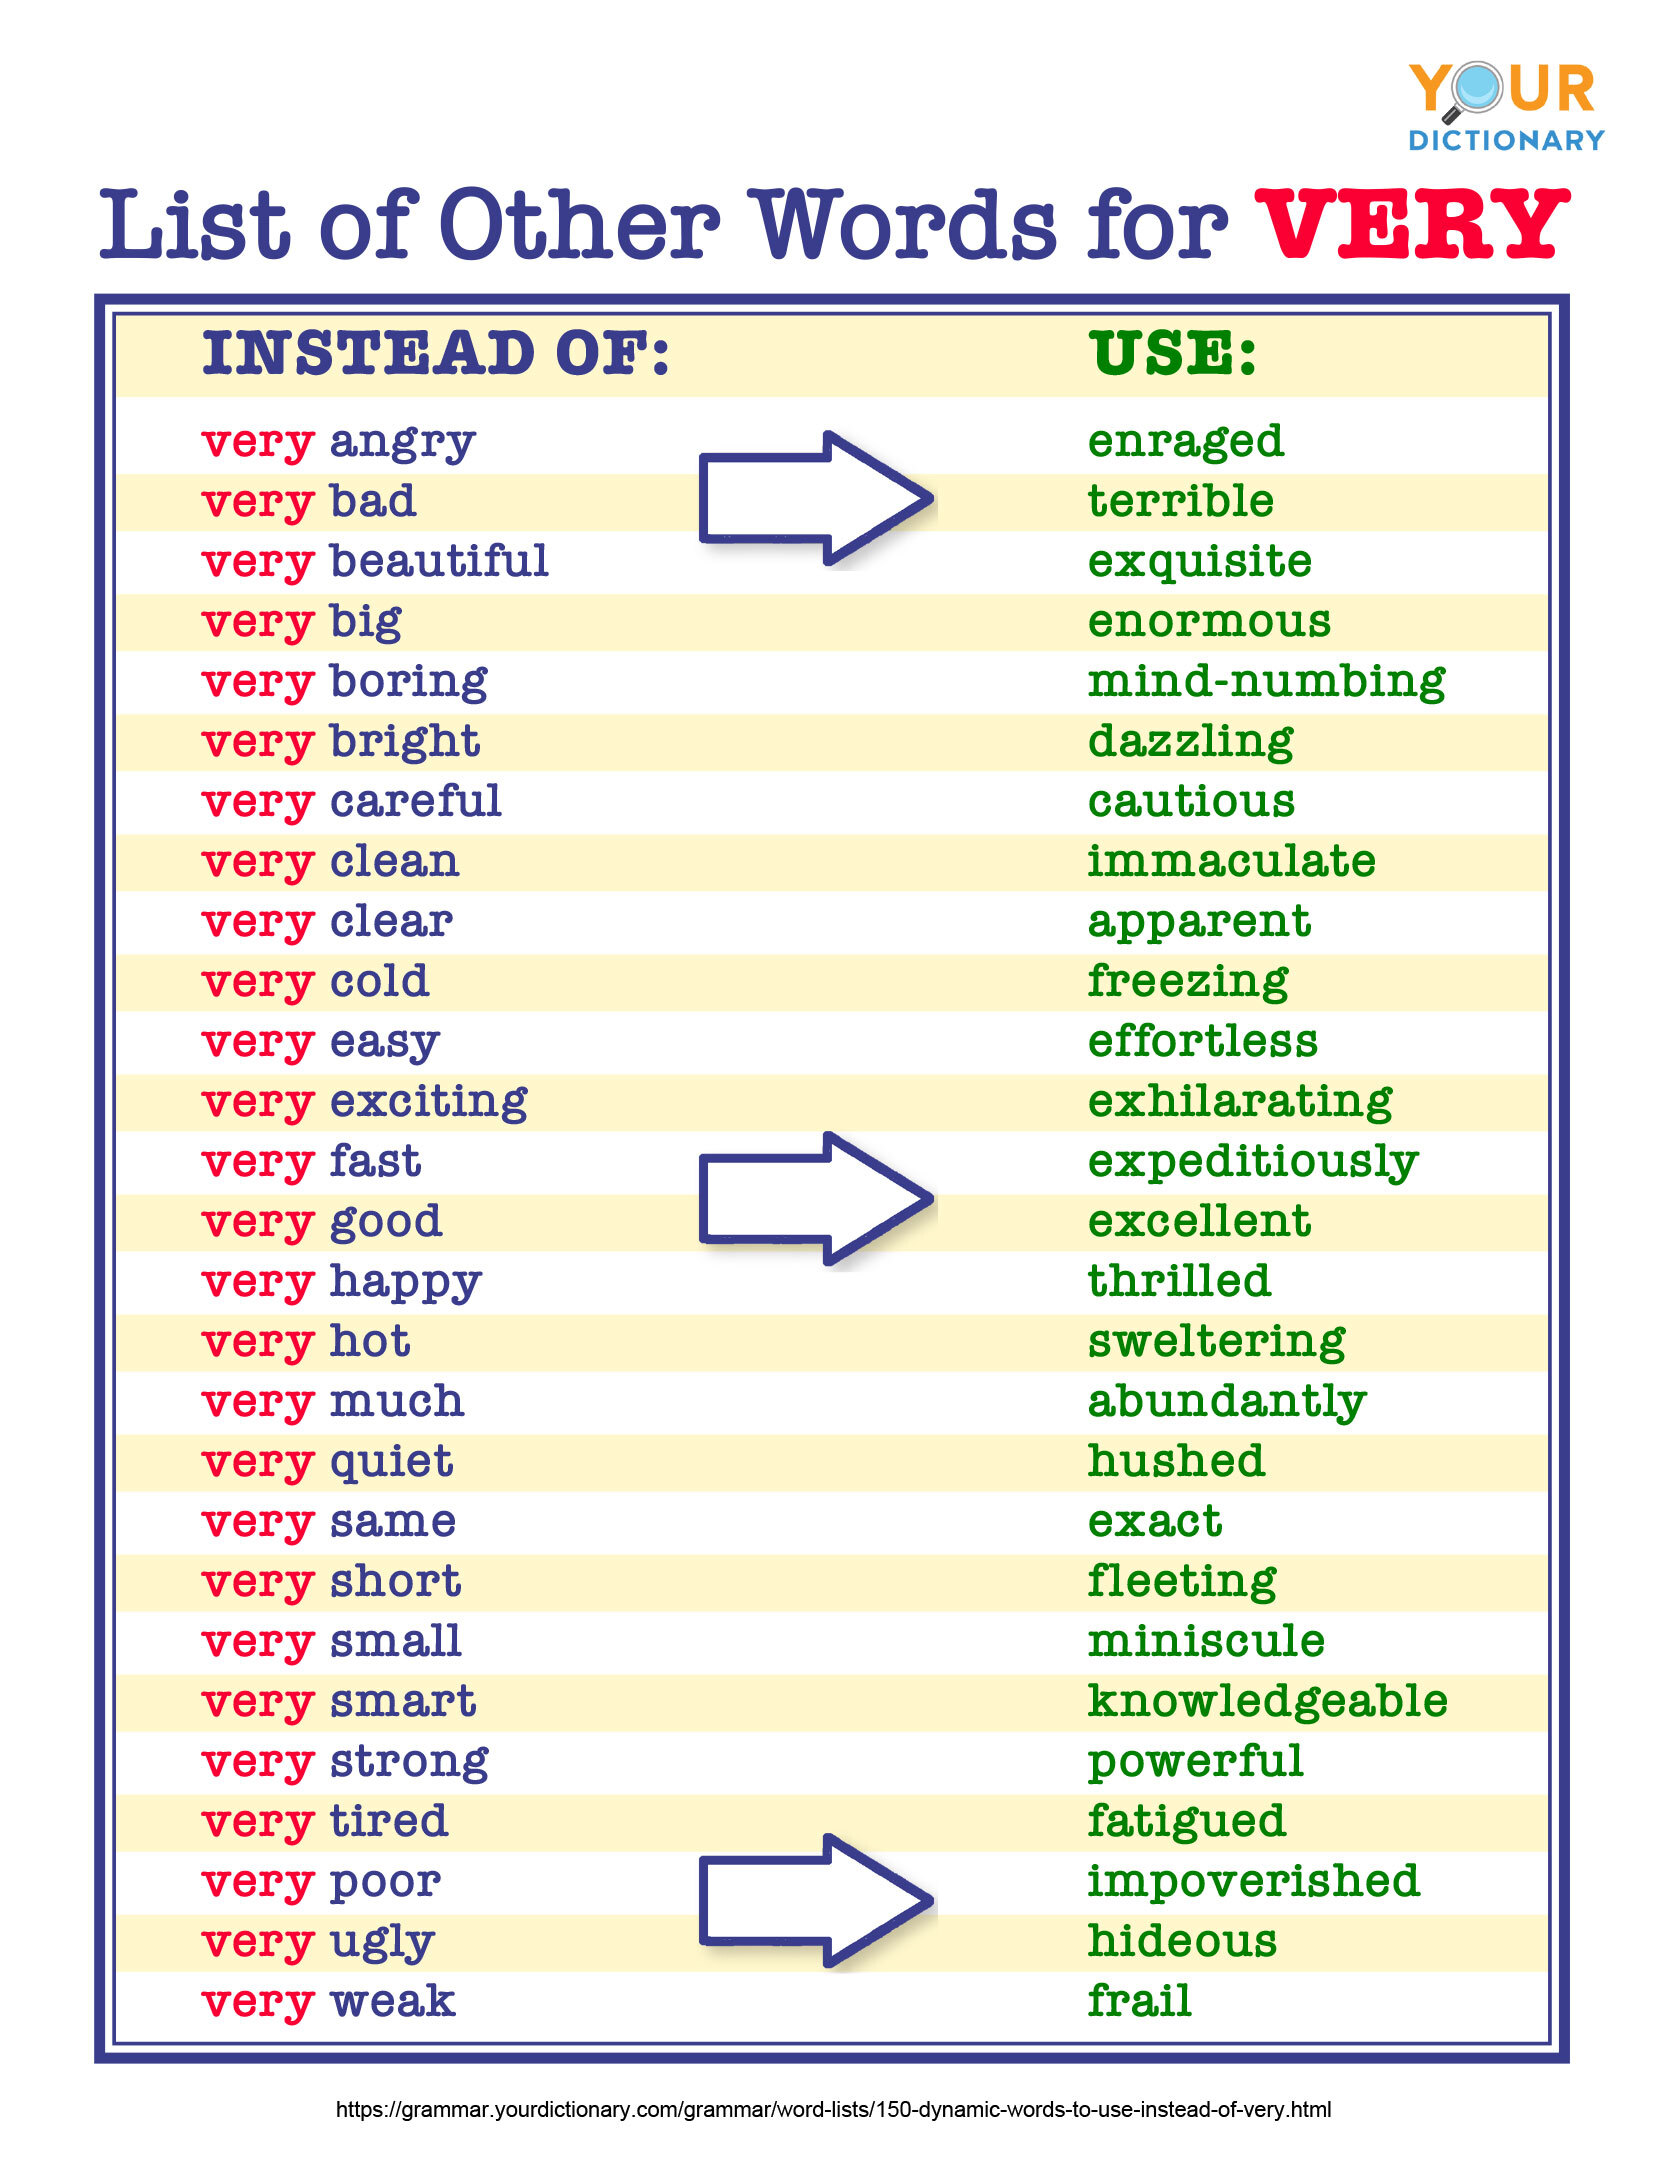 20+ Other Words to Use Instead of Very